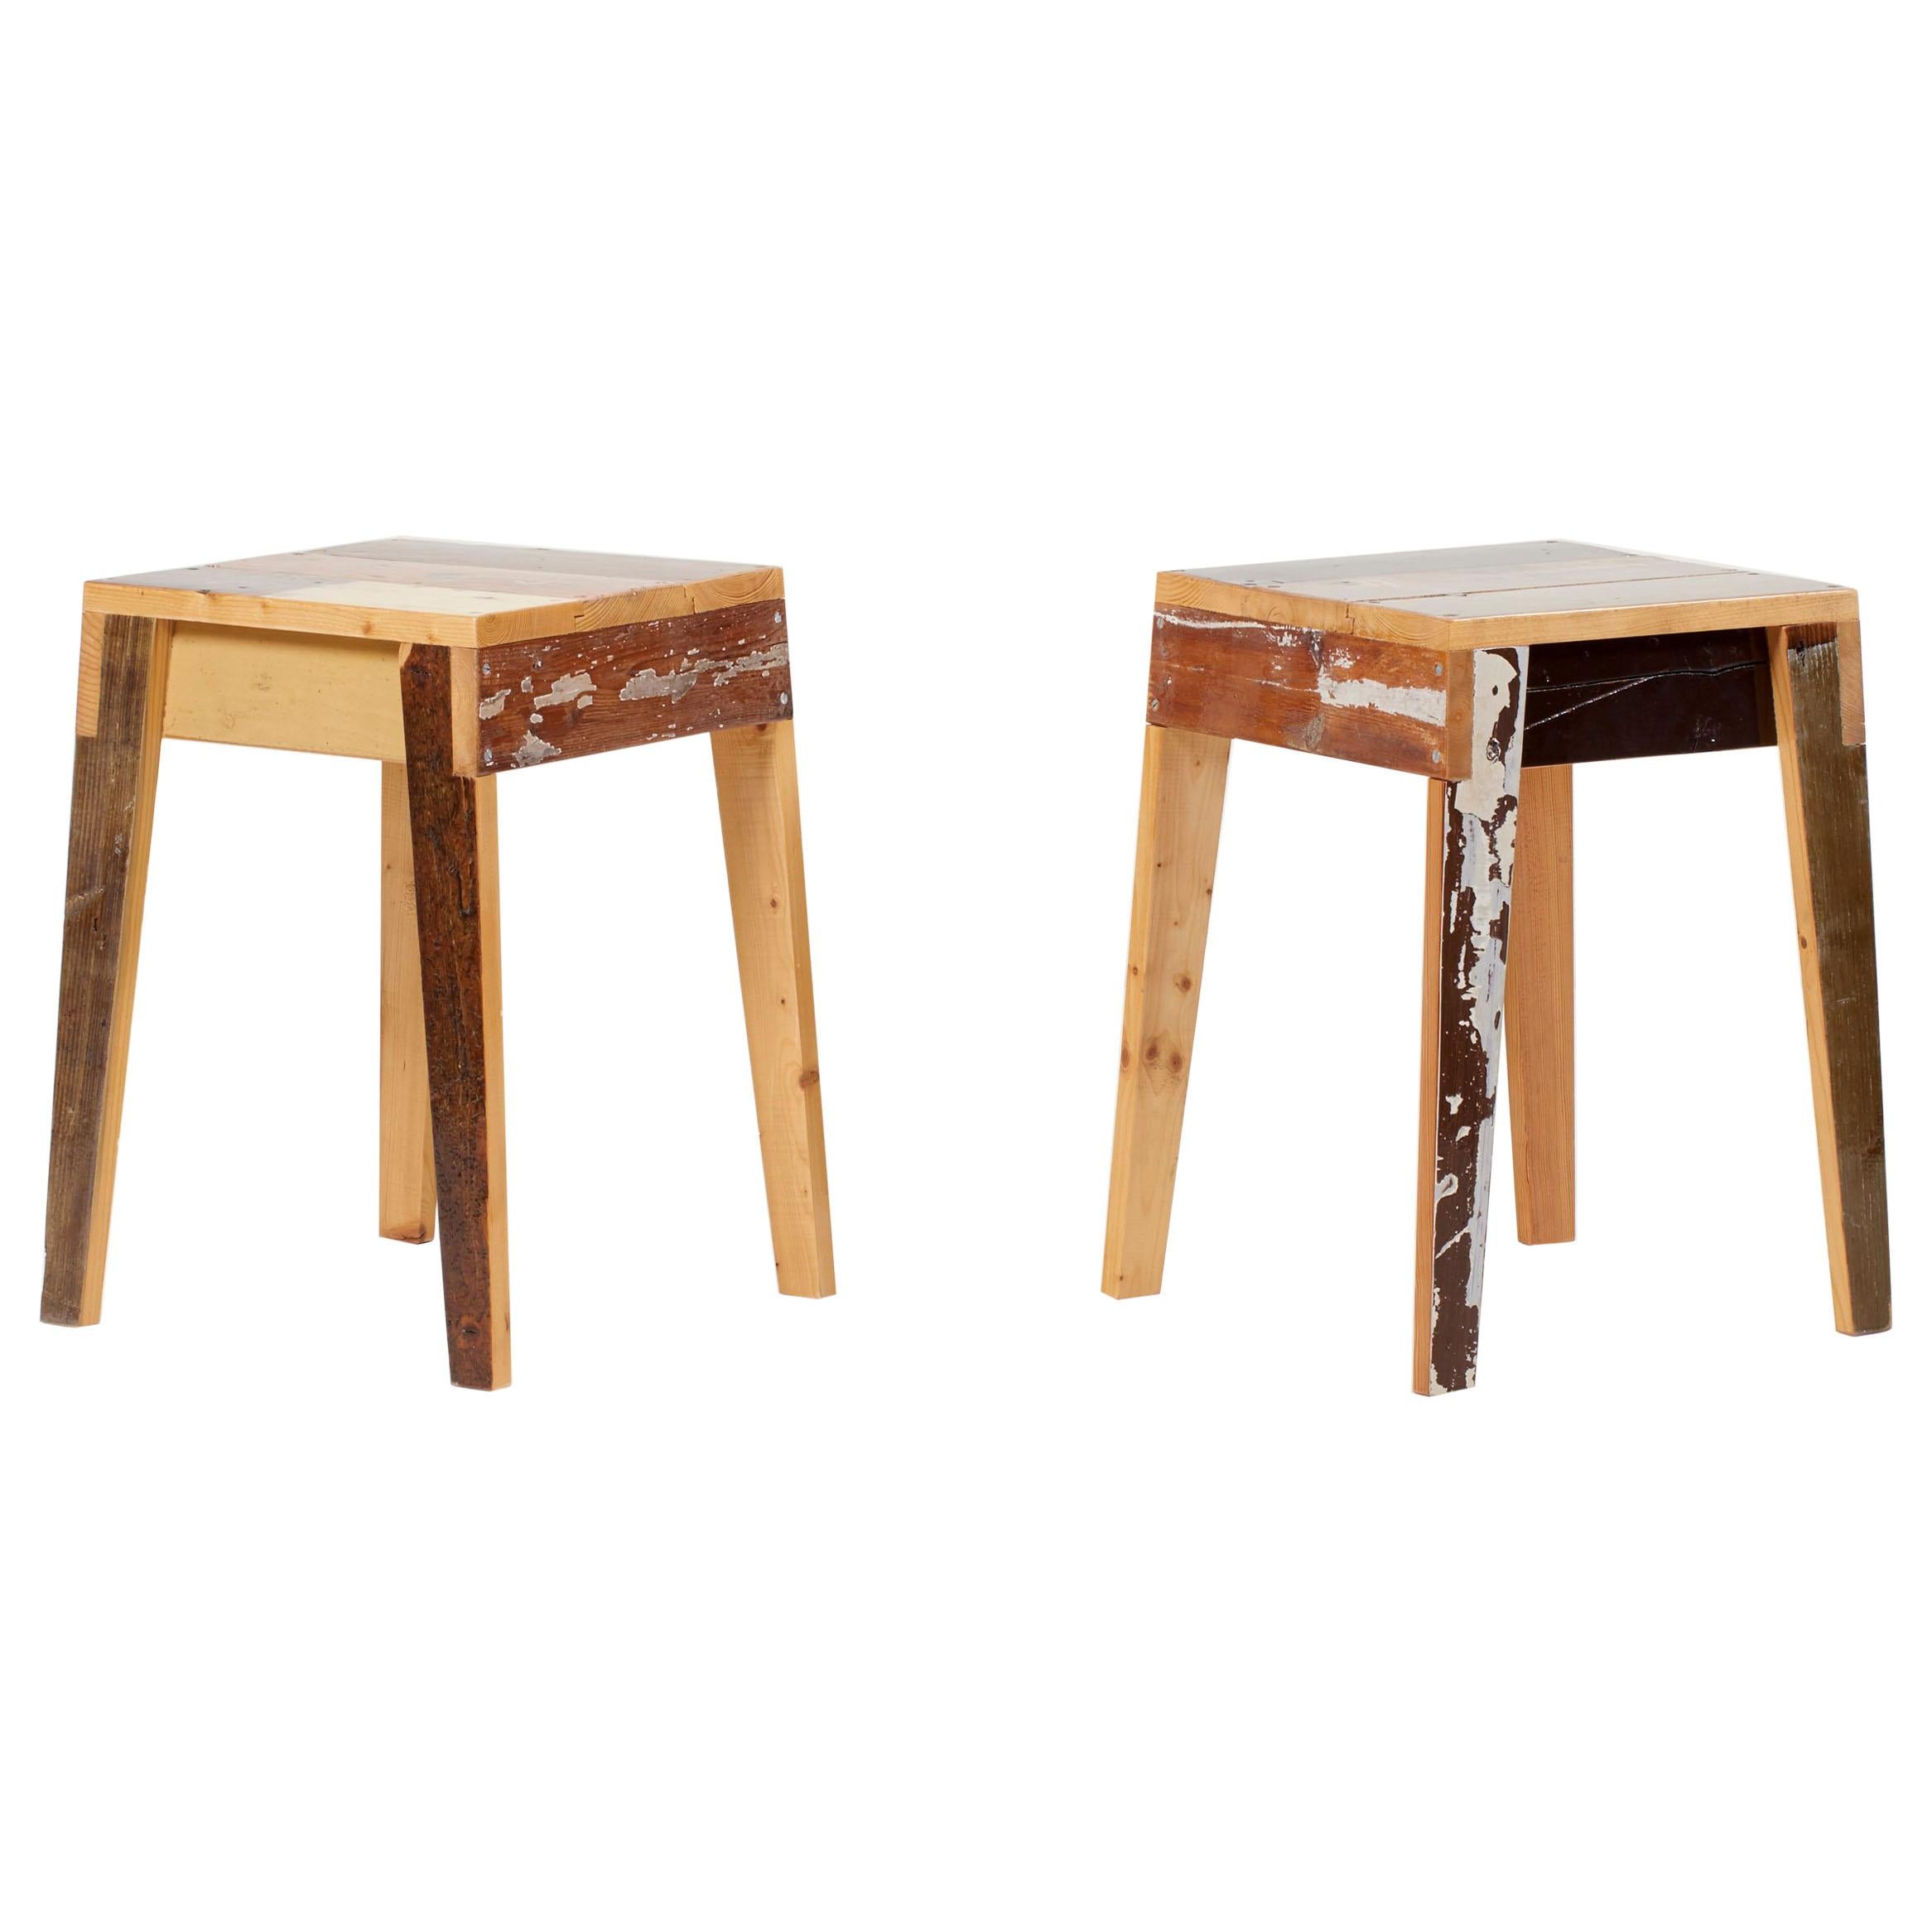 Pair of Lacquered Oak Stools by Piet Hein Eek